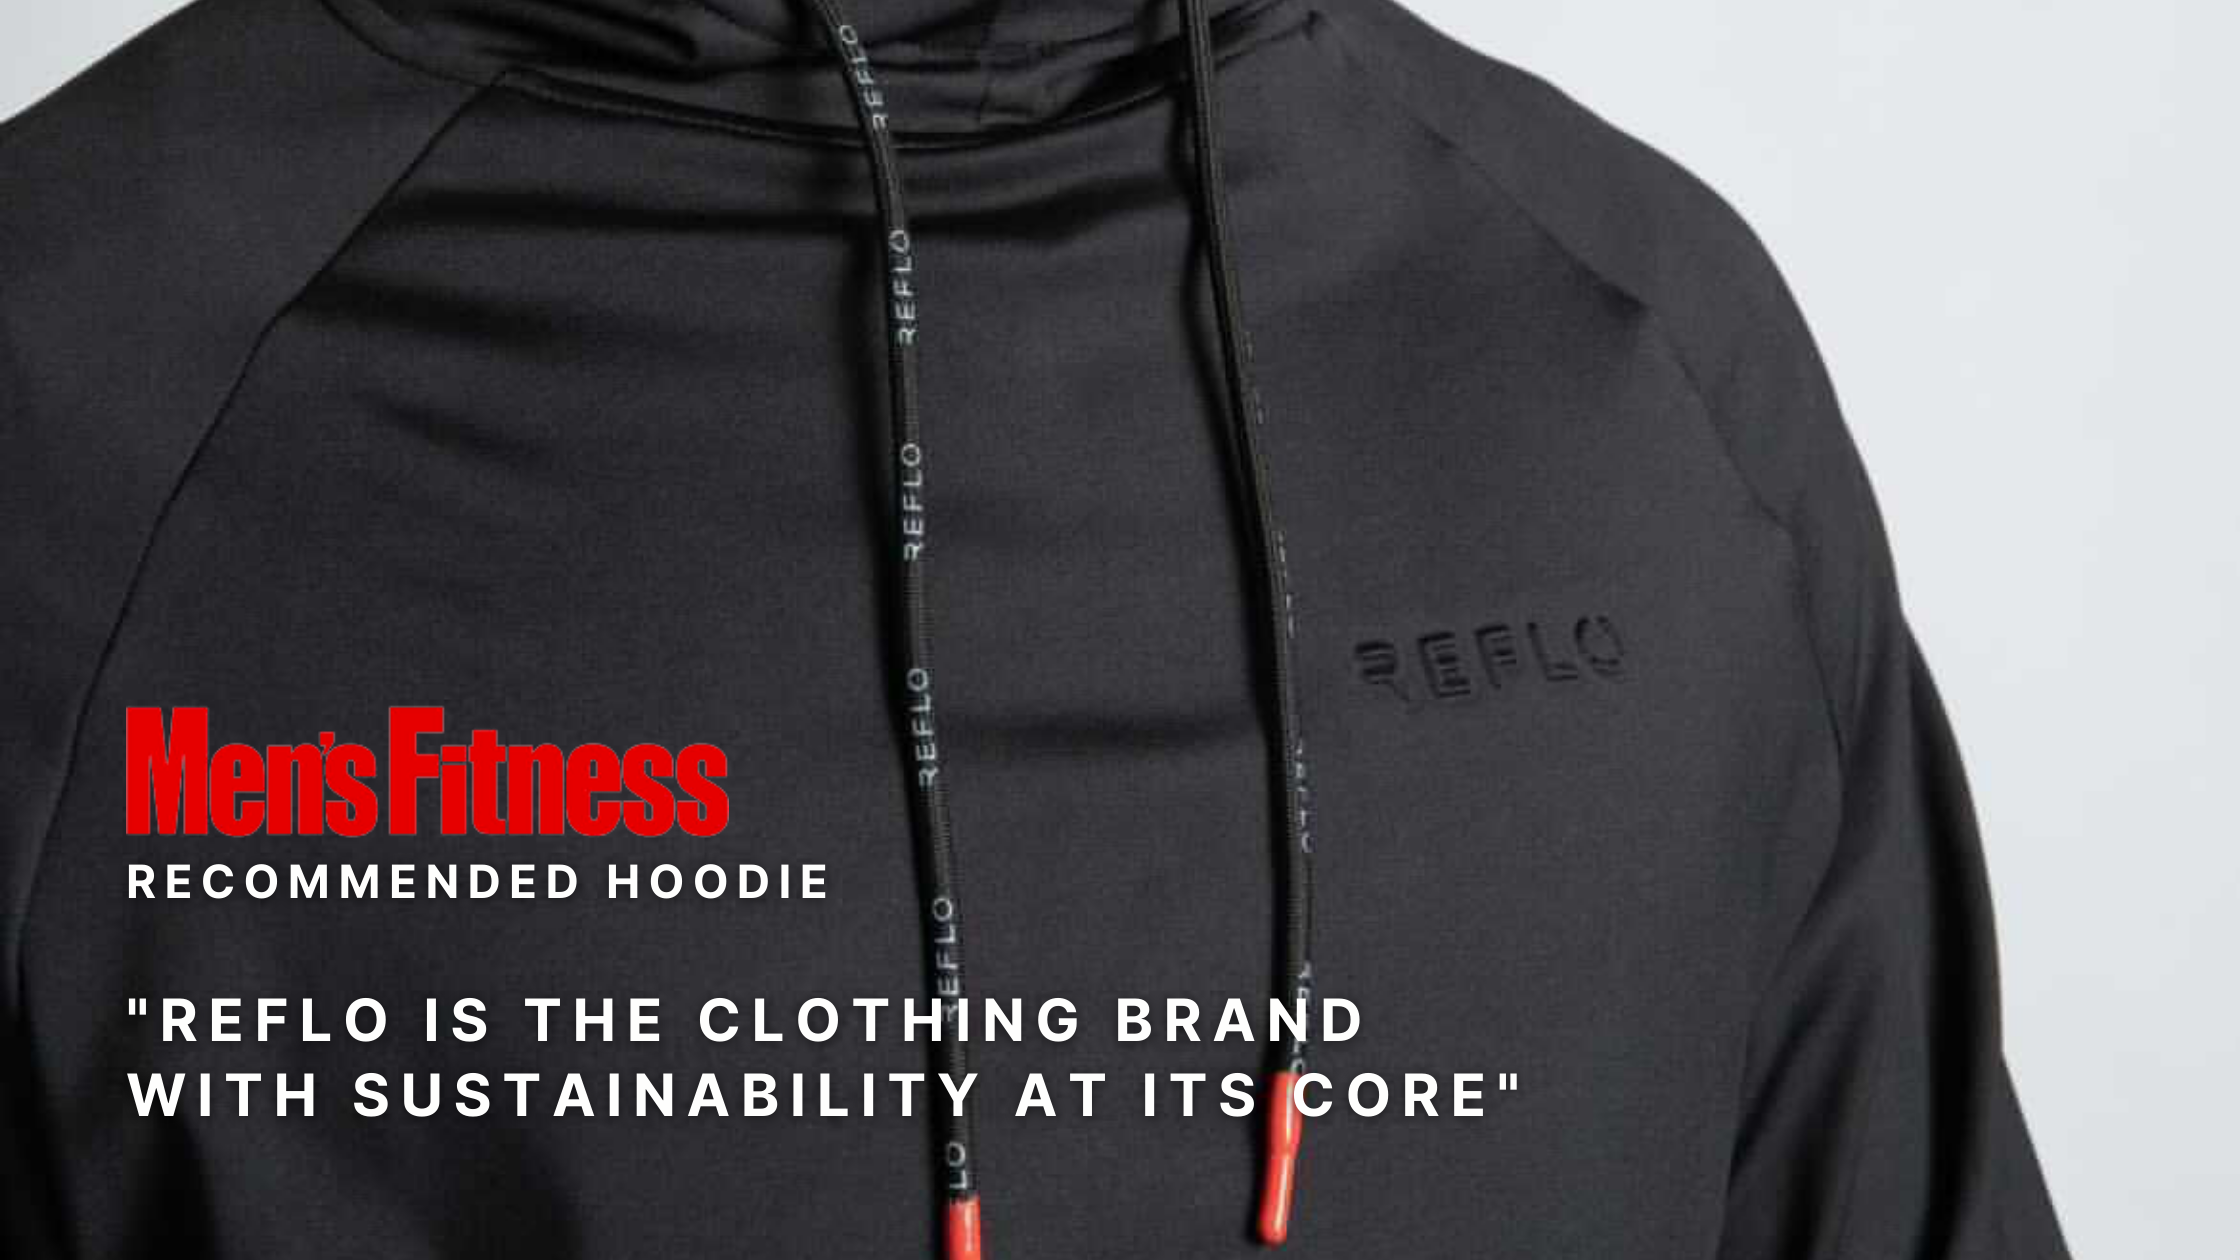 Reflo’s Sustainable Lapter Hoodie wins award!